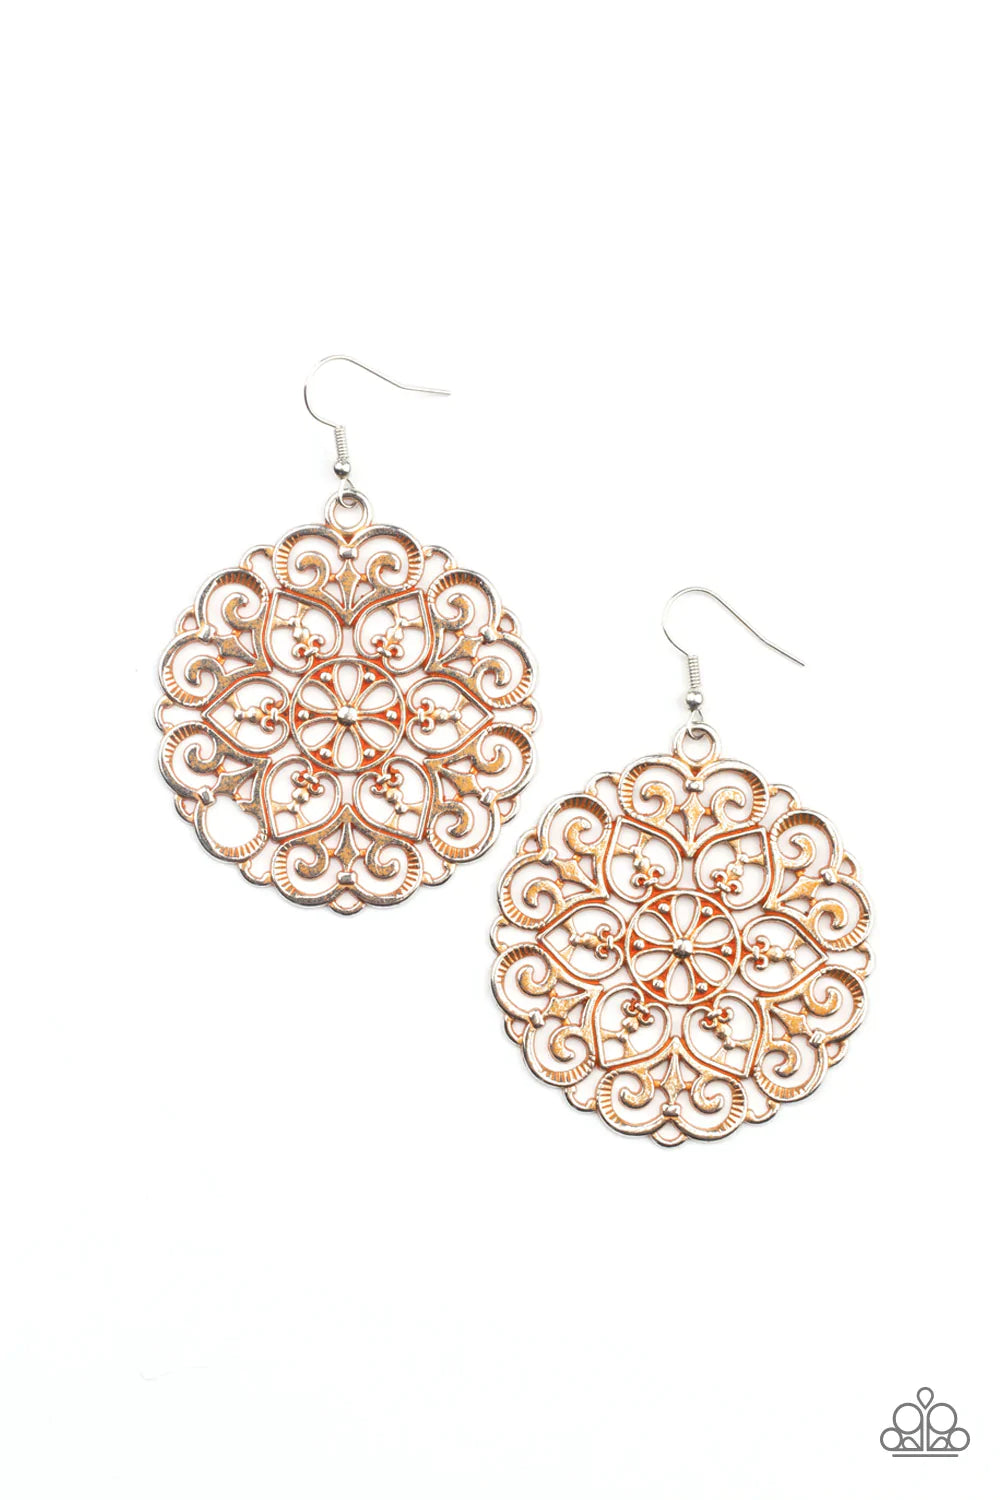 Paparazzi Accessories MANDALA Effect - Orange Brushed in a rustic orange finish, an oversized mandala-like silver frame swings from the ear for a seasonal pop of color. Earring attaches to a standard fishhook fitting. Sold as one pair of earrings. Jewelry